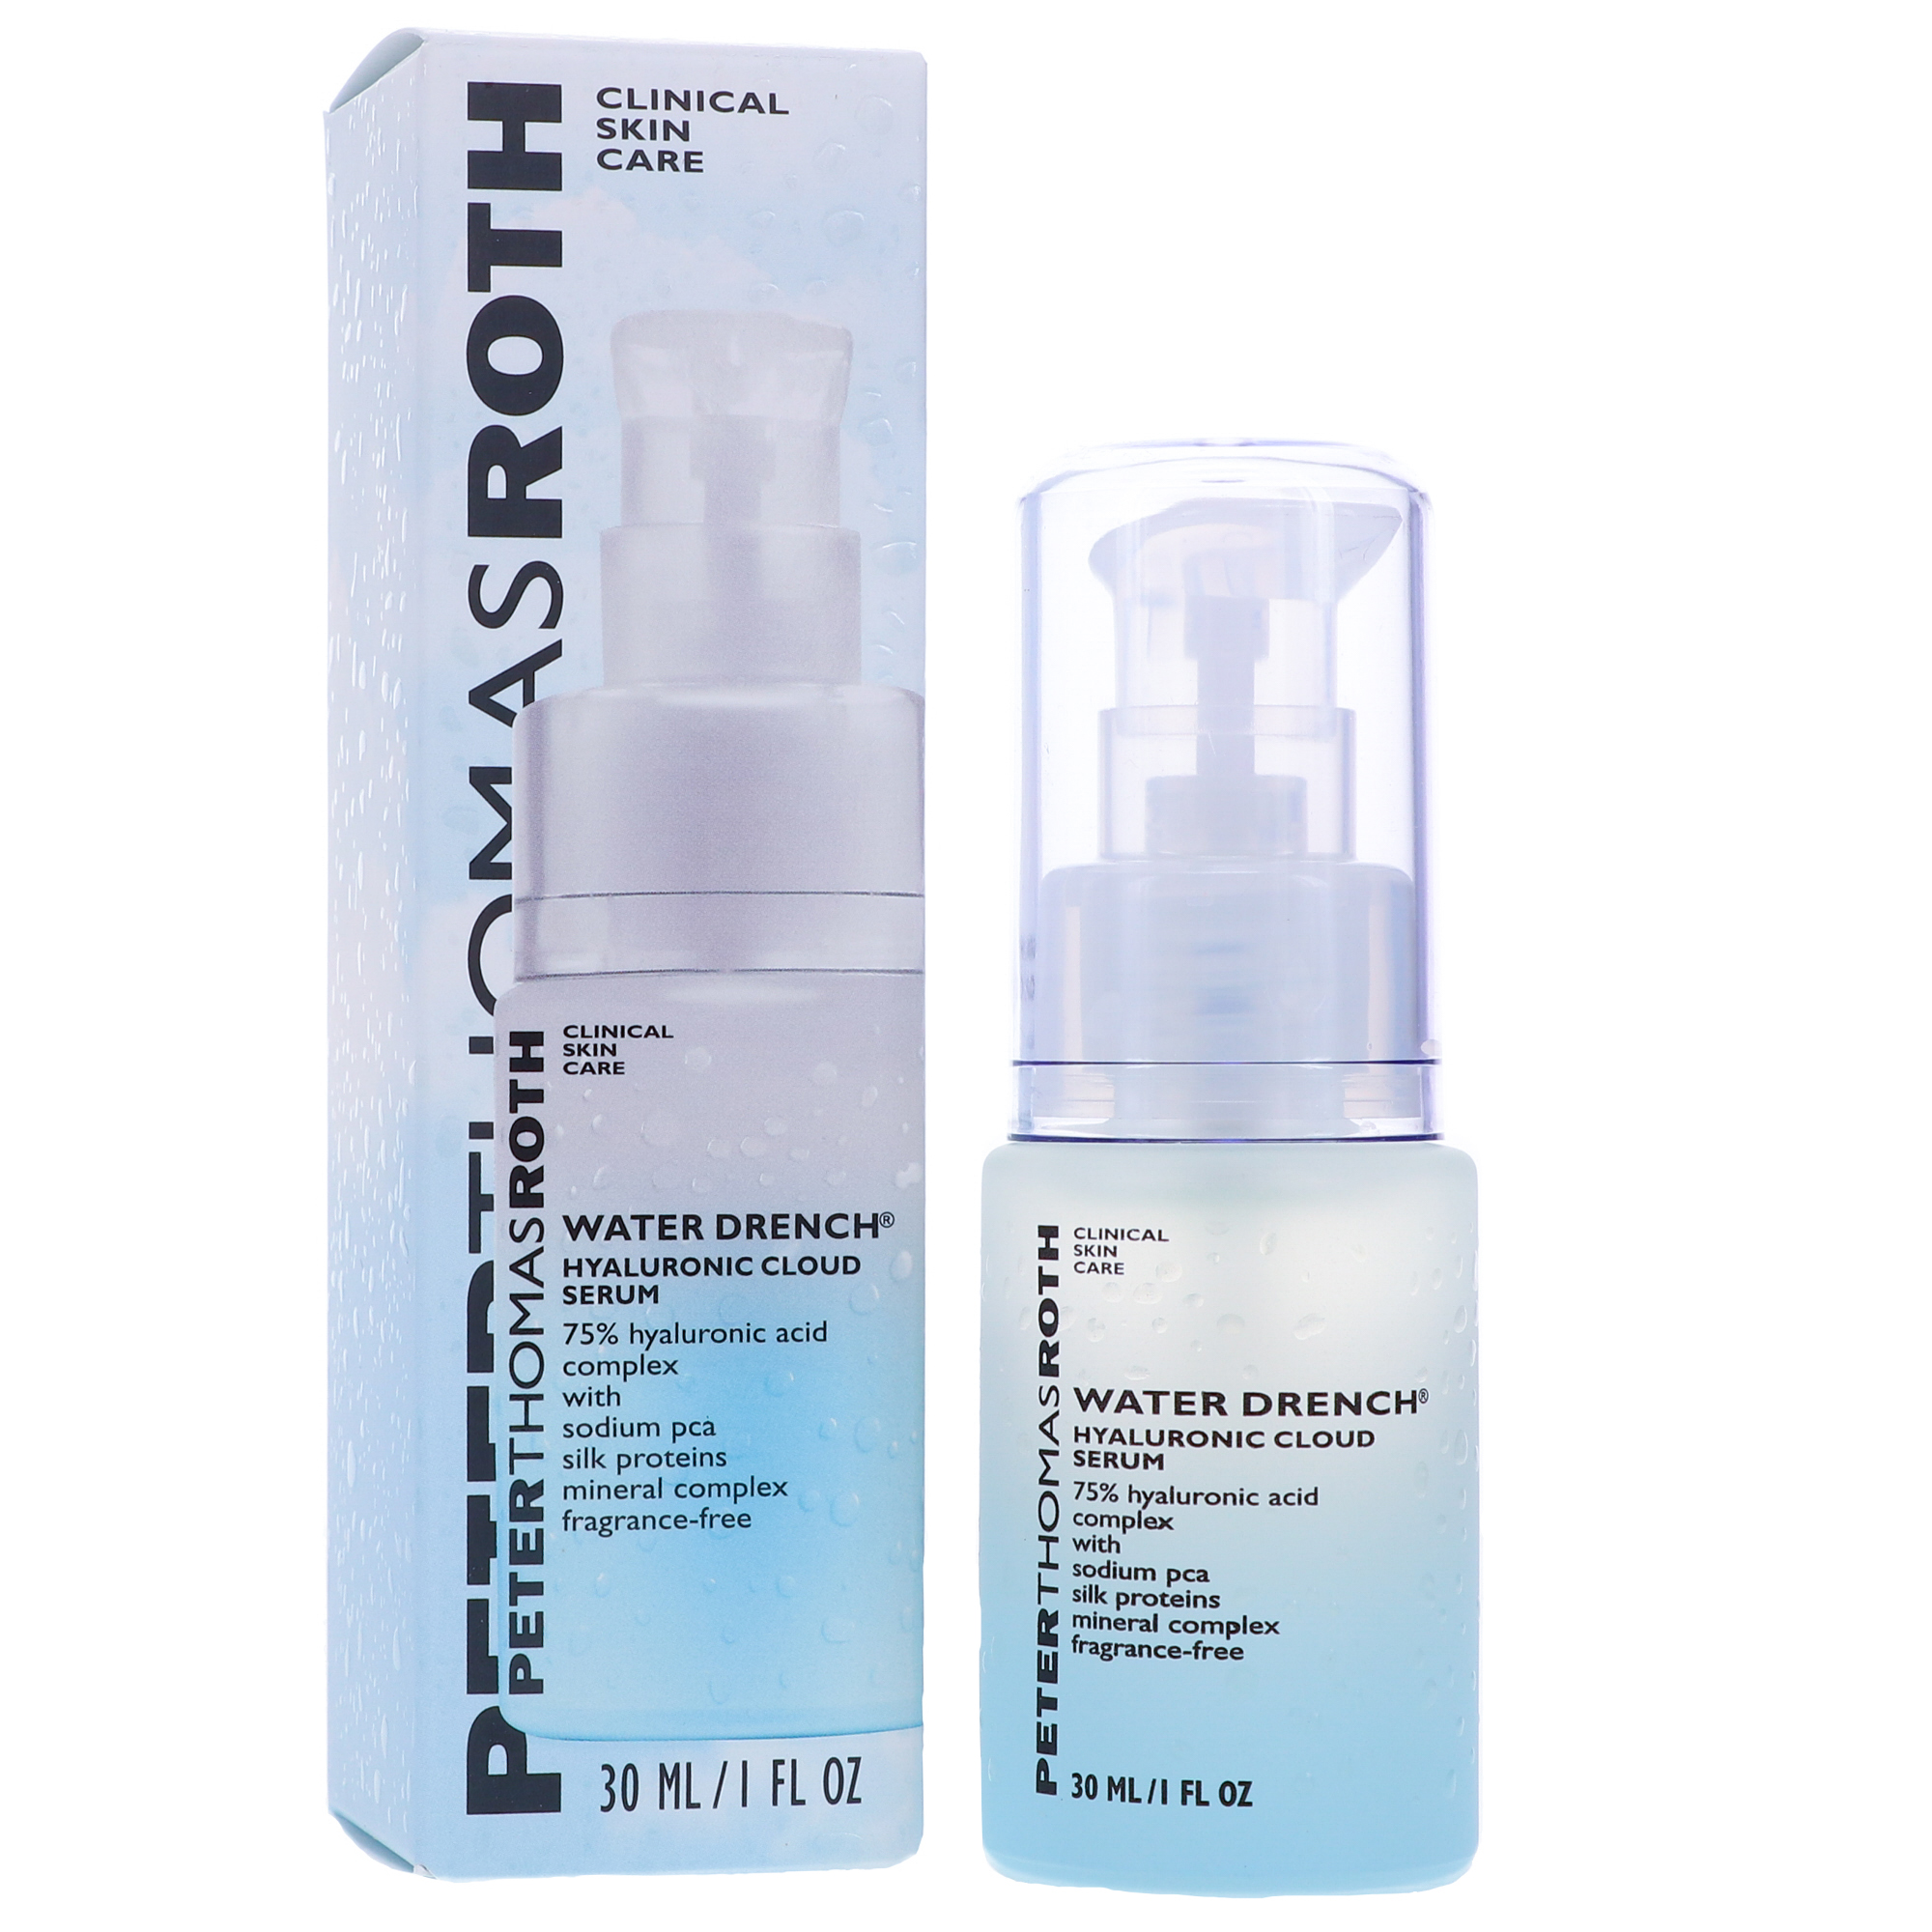 Peter Thomas Roth Water Drench Hyaluronic Cloud Serum 1 oz - image 2 of 2